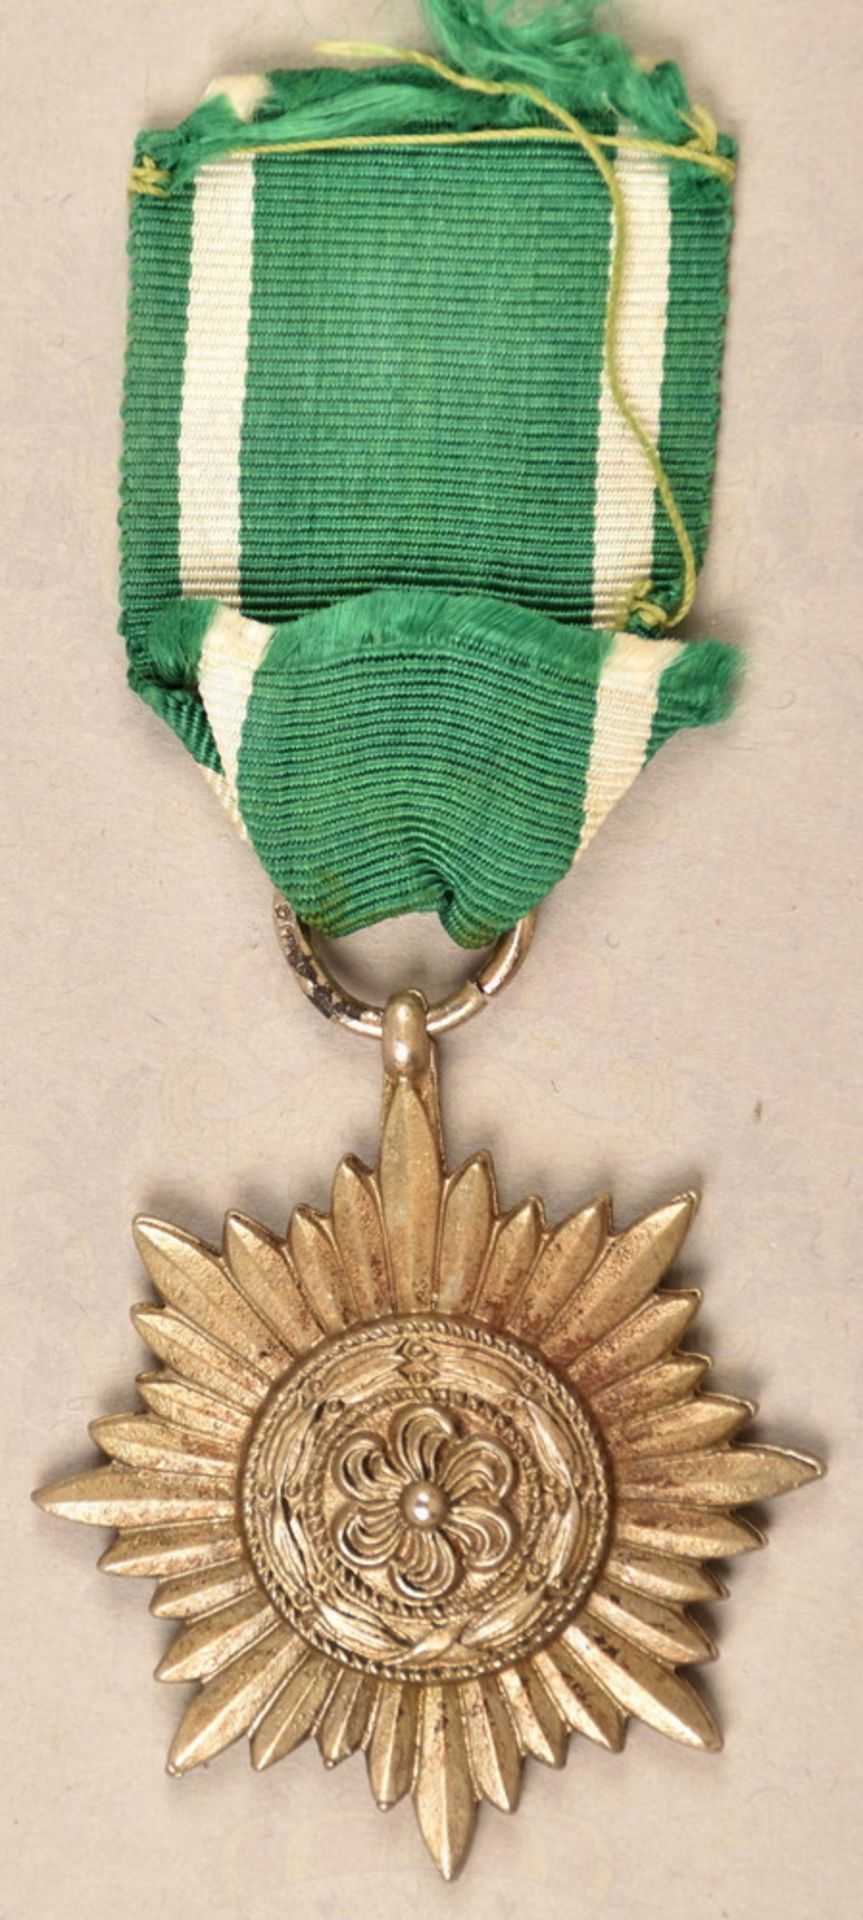 Medal of Merit for members of the Eastern People 2nd Class